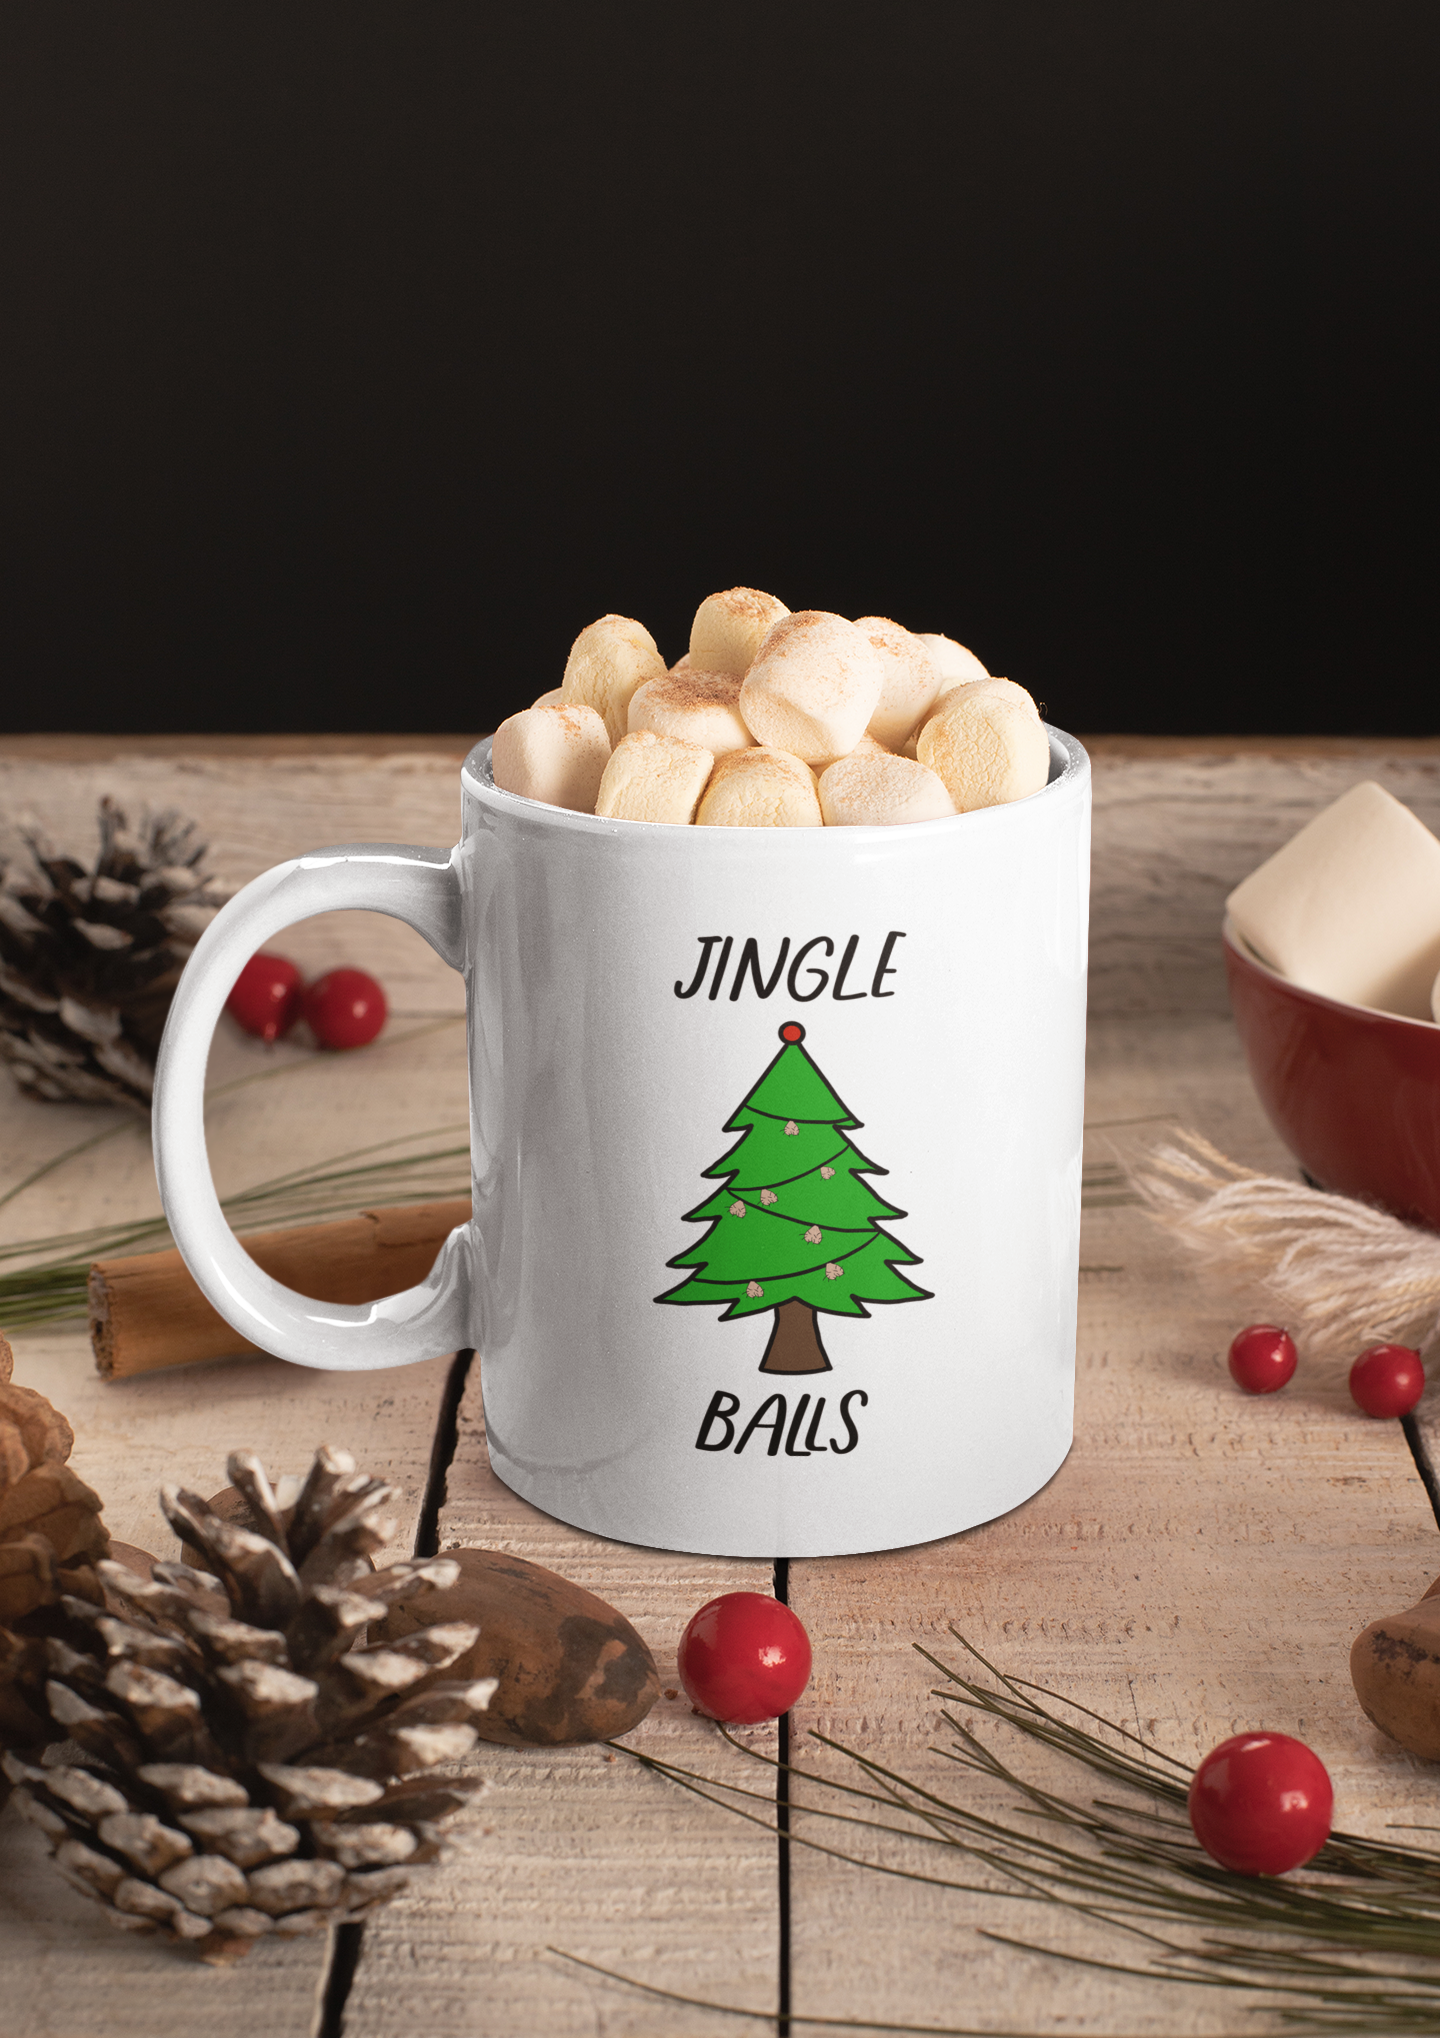 A glossy white 11oz mug with a cartoon drawn green Christmas tree with string ball sack lights circling the tree. The word Jingle is printed above the tree in black font and the word Balls is printed below the tree in black font. There are marsh mellows in the mug and the mug is surrounded by festive pinecones and berries. 